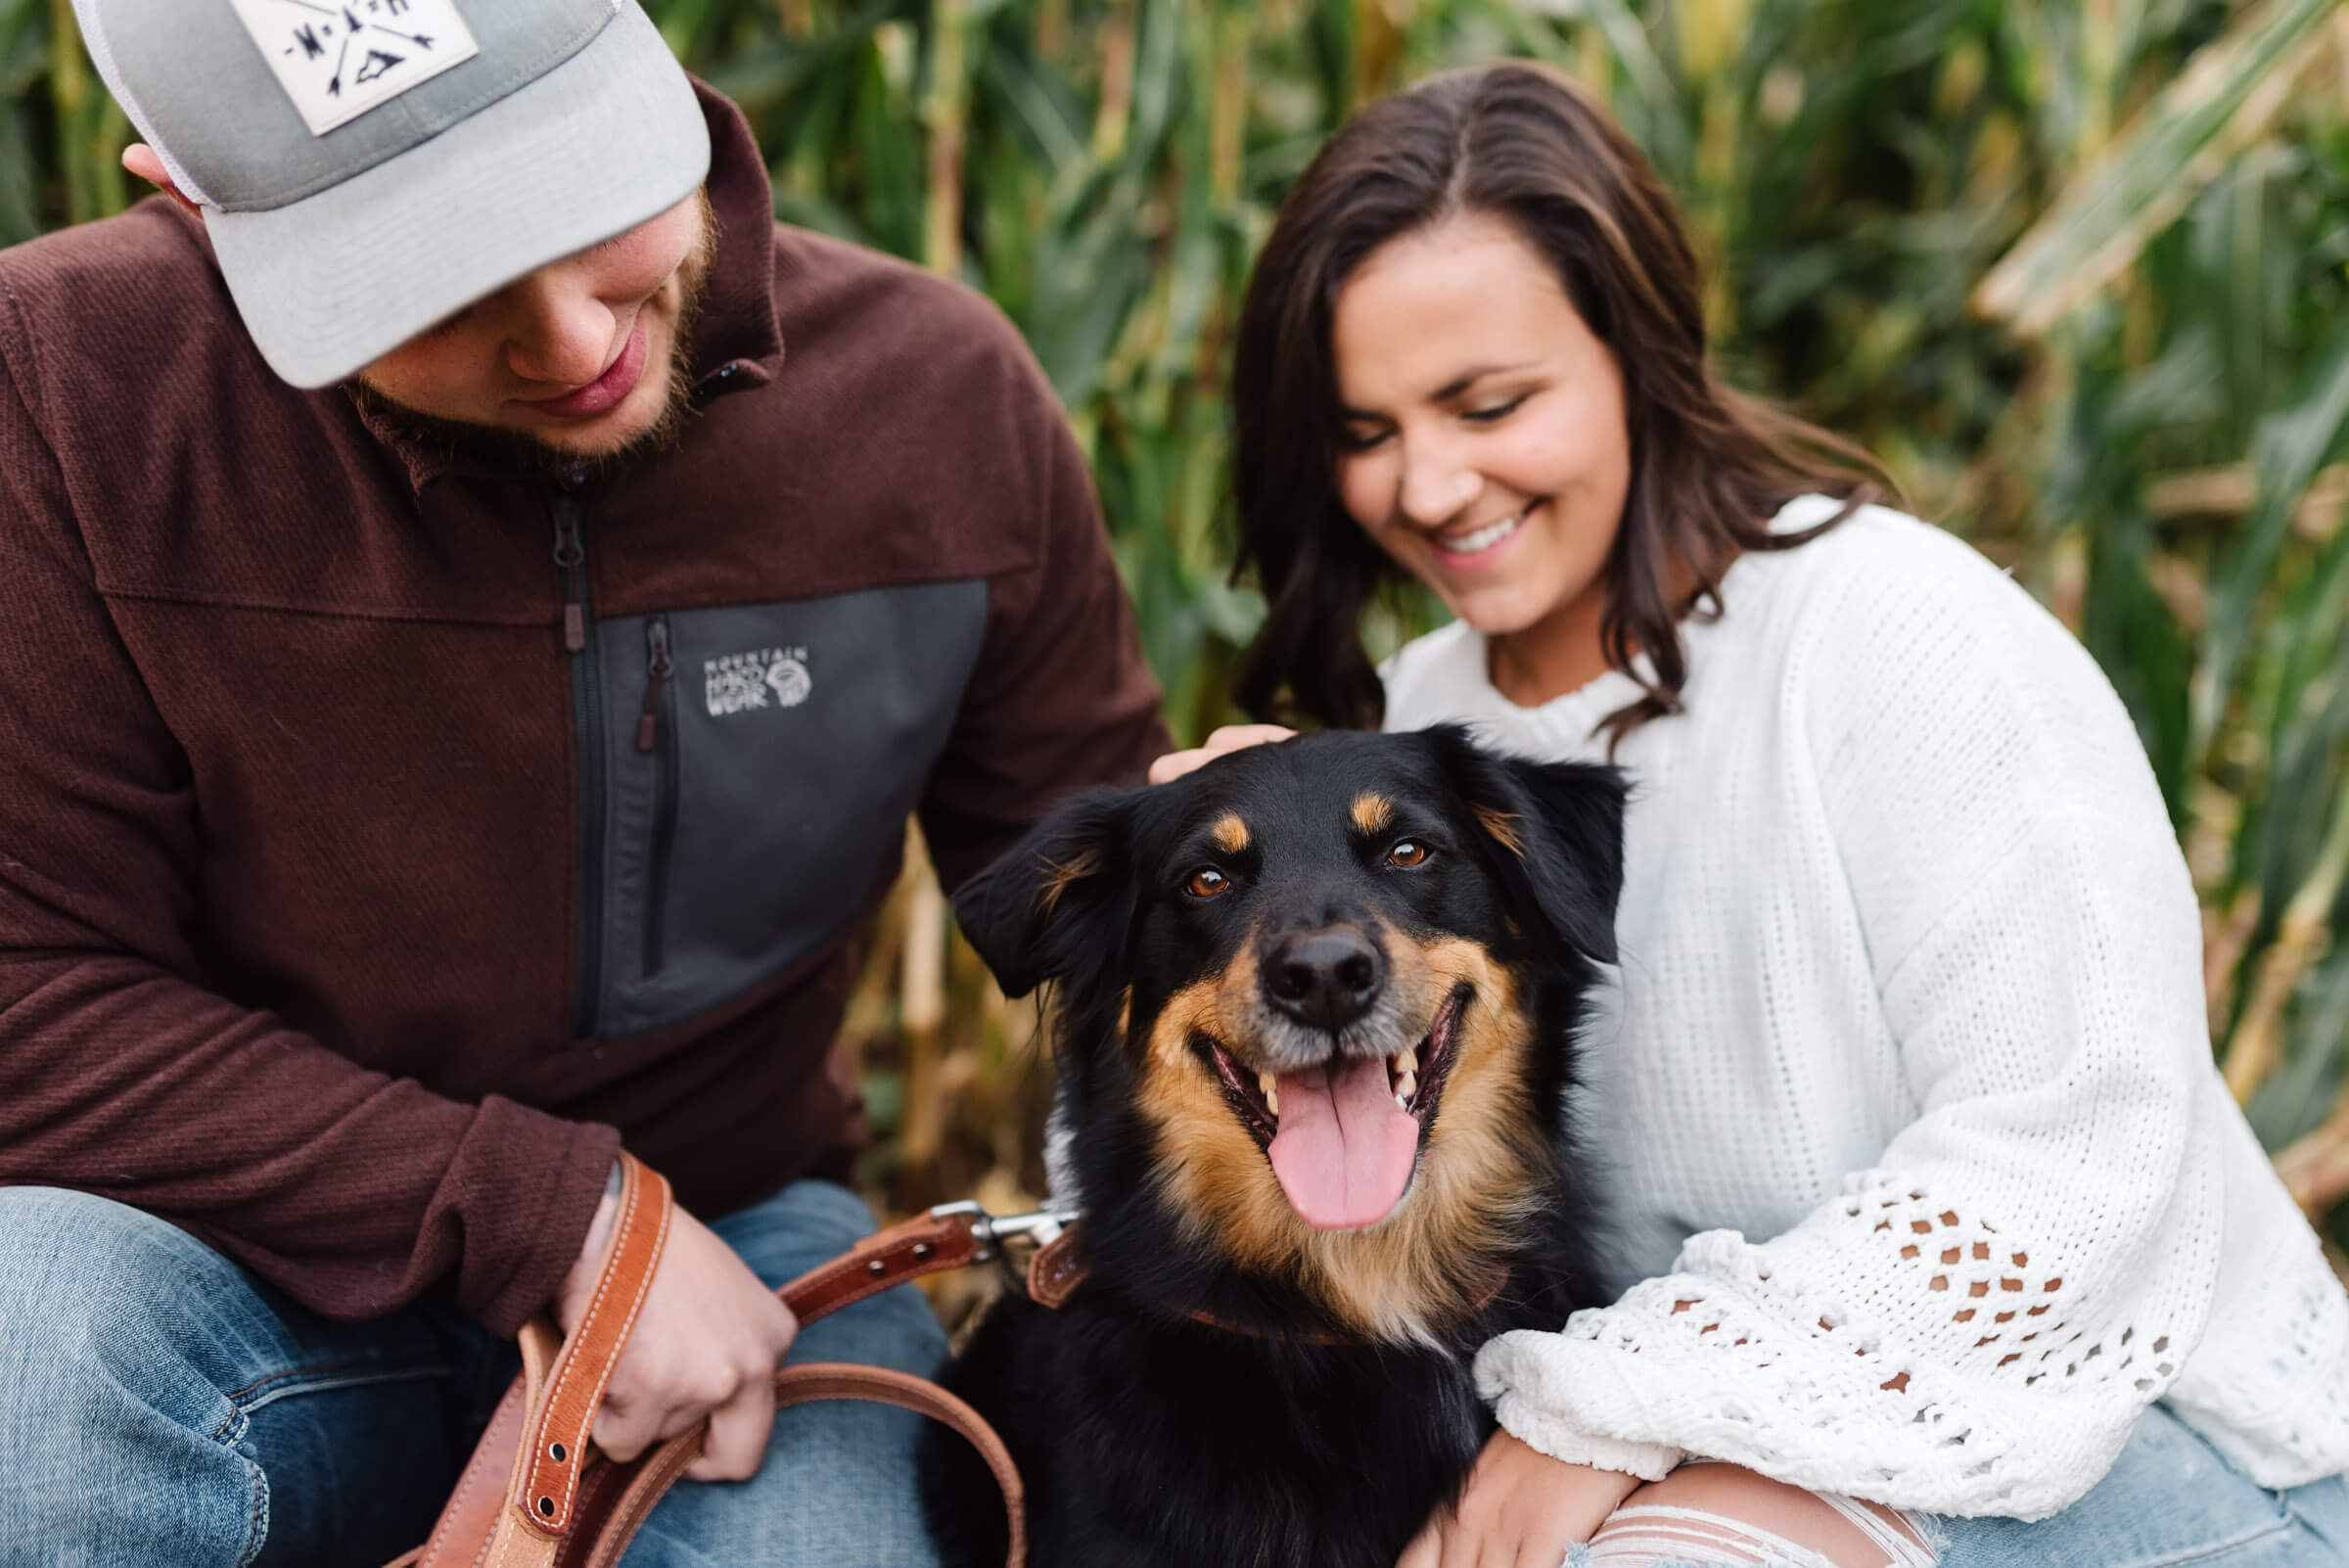 brown and black dog with tongue out during engagement shoot